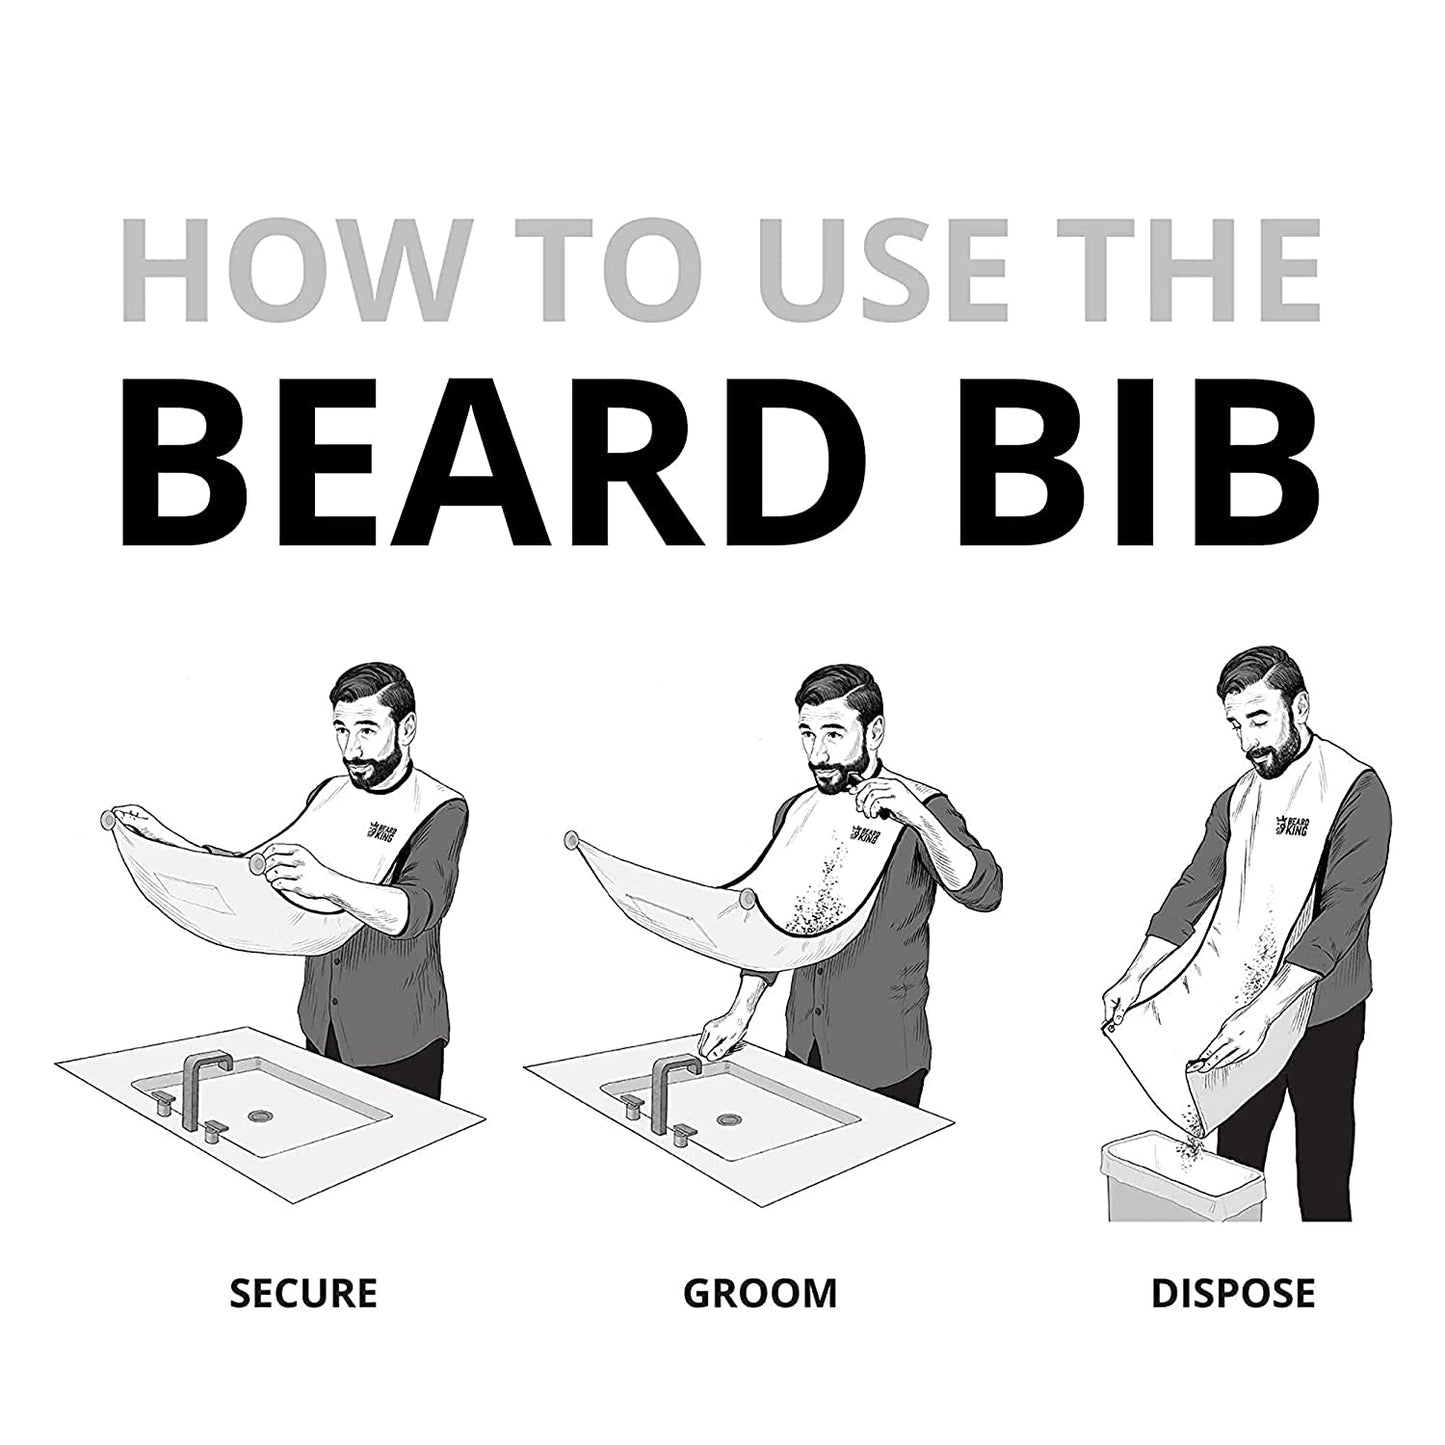 A 3-step instruction guide on how to use the beard bib.